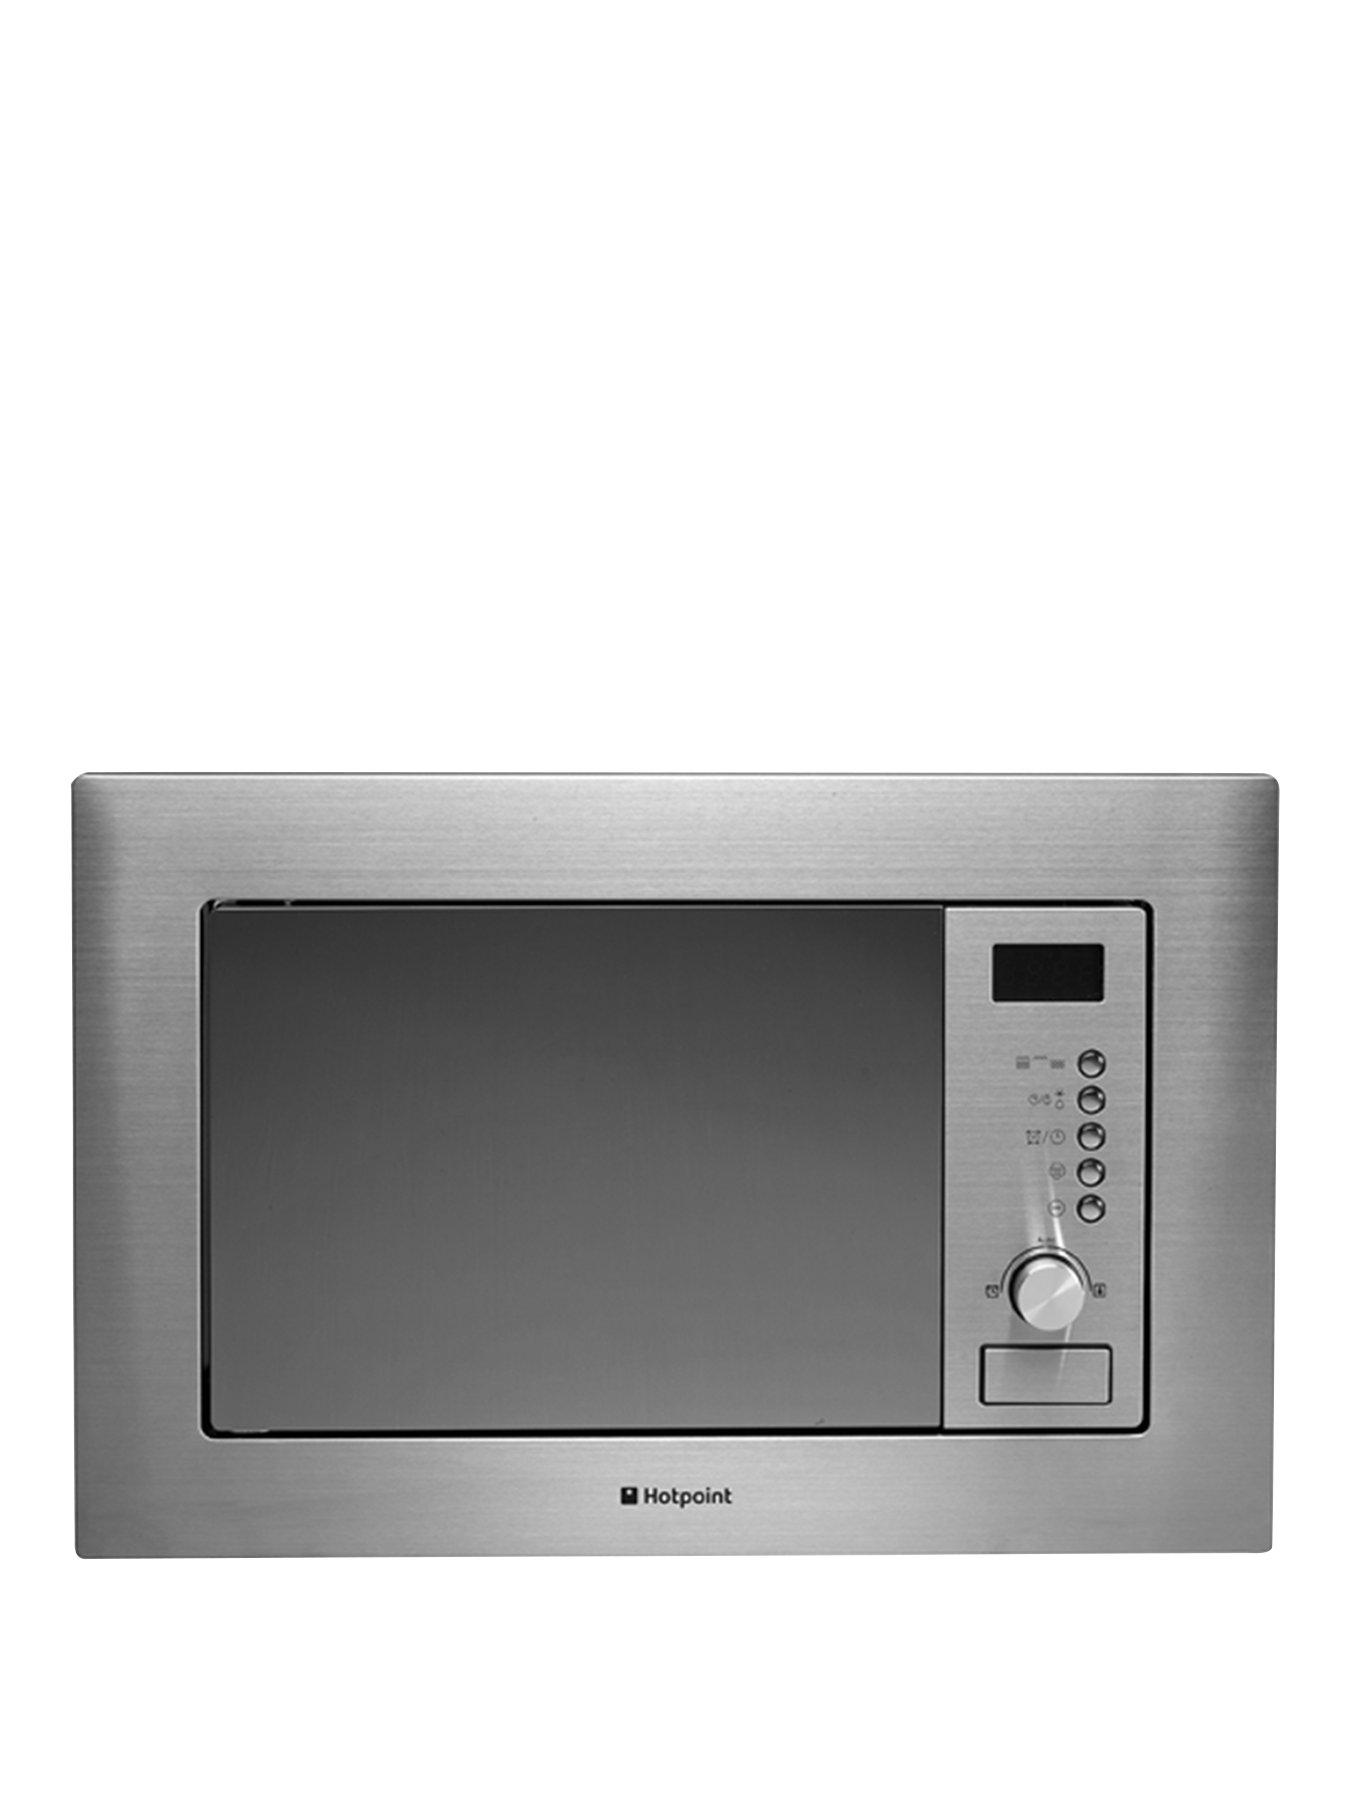 Hotpoint Newstyle Mwh122.1X Built-In Microwave Oven With Grill And Optional Installation – Stainless Steel – Microwave Only